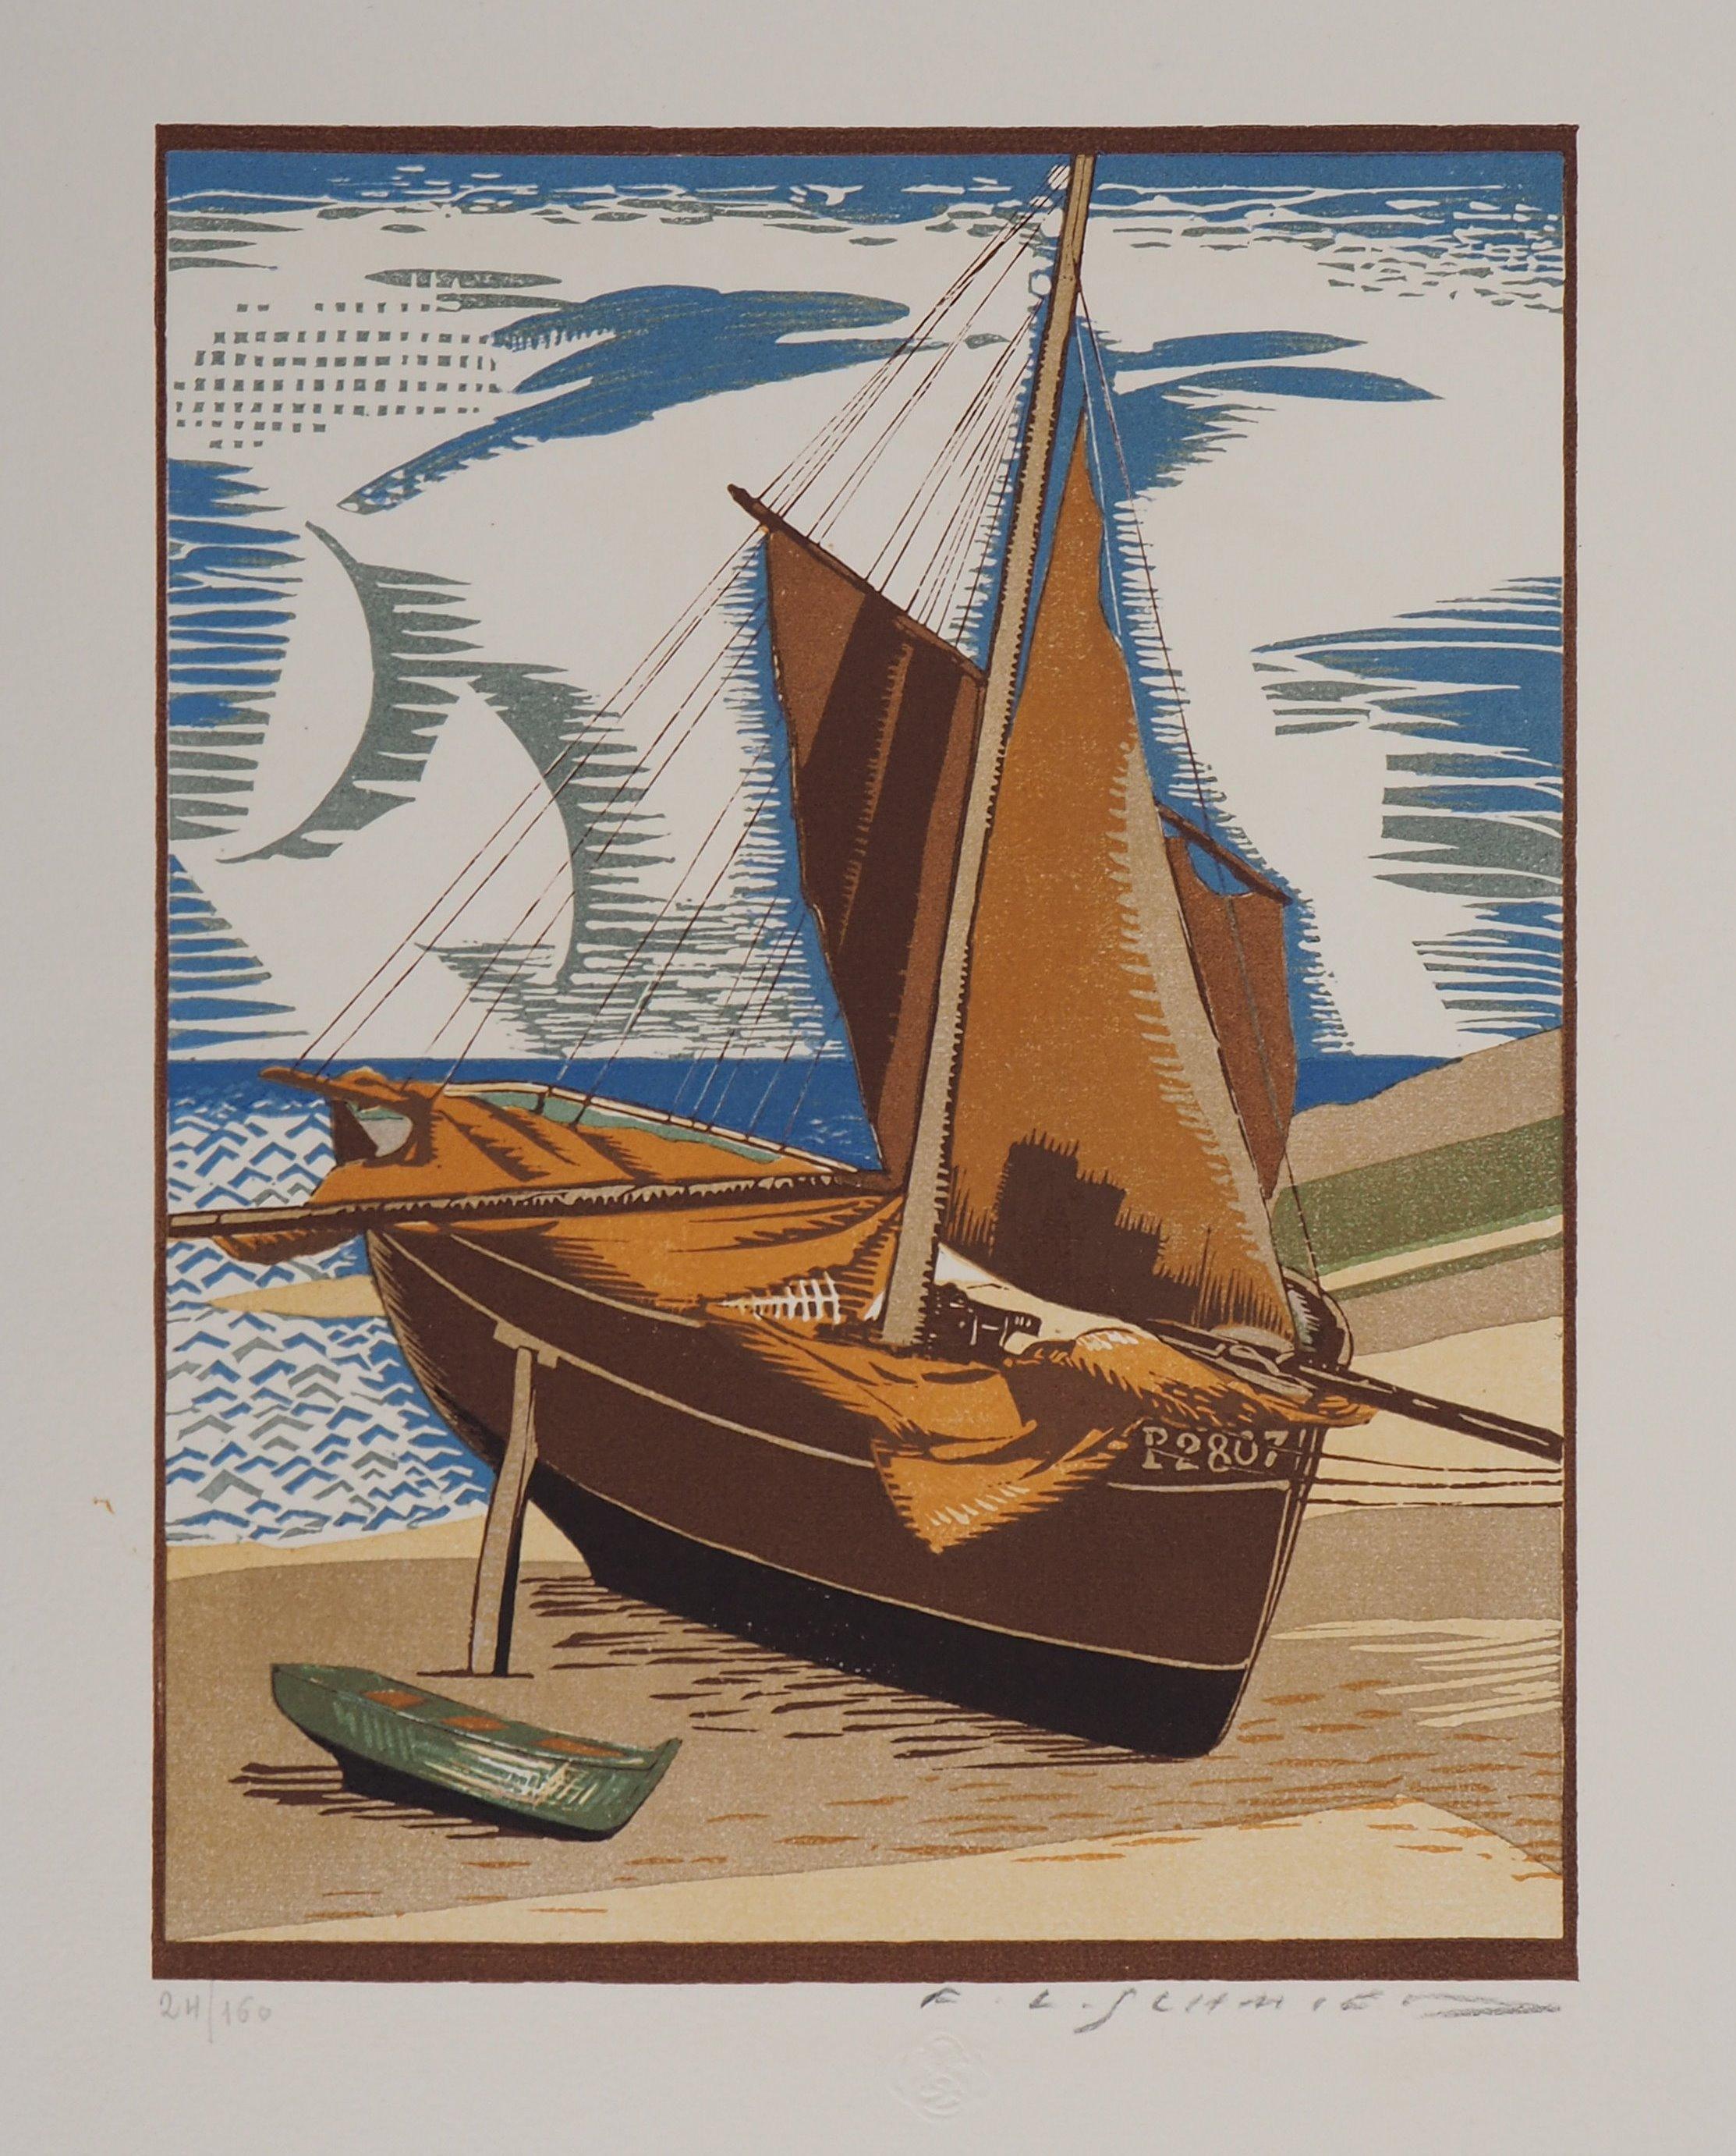 Lobster Boat On The Shore - Original Wooodcut, Handsigned - Print by François-Louis Schmied